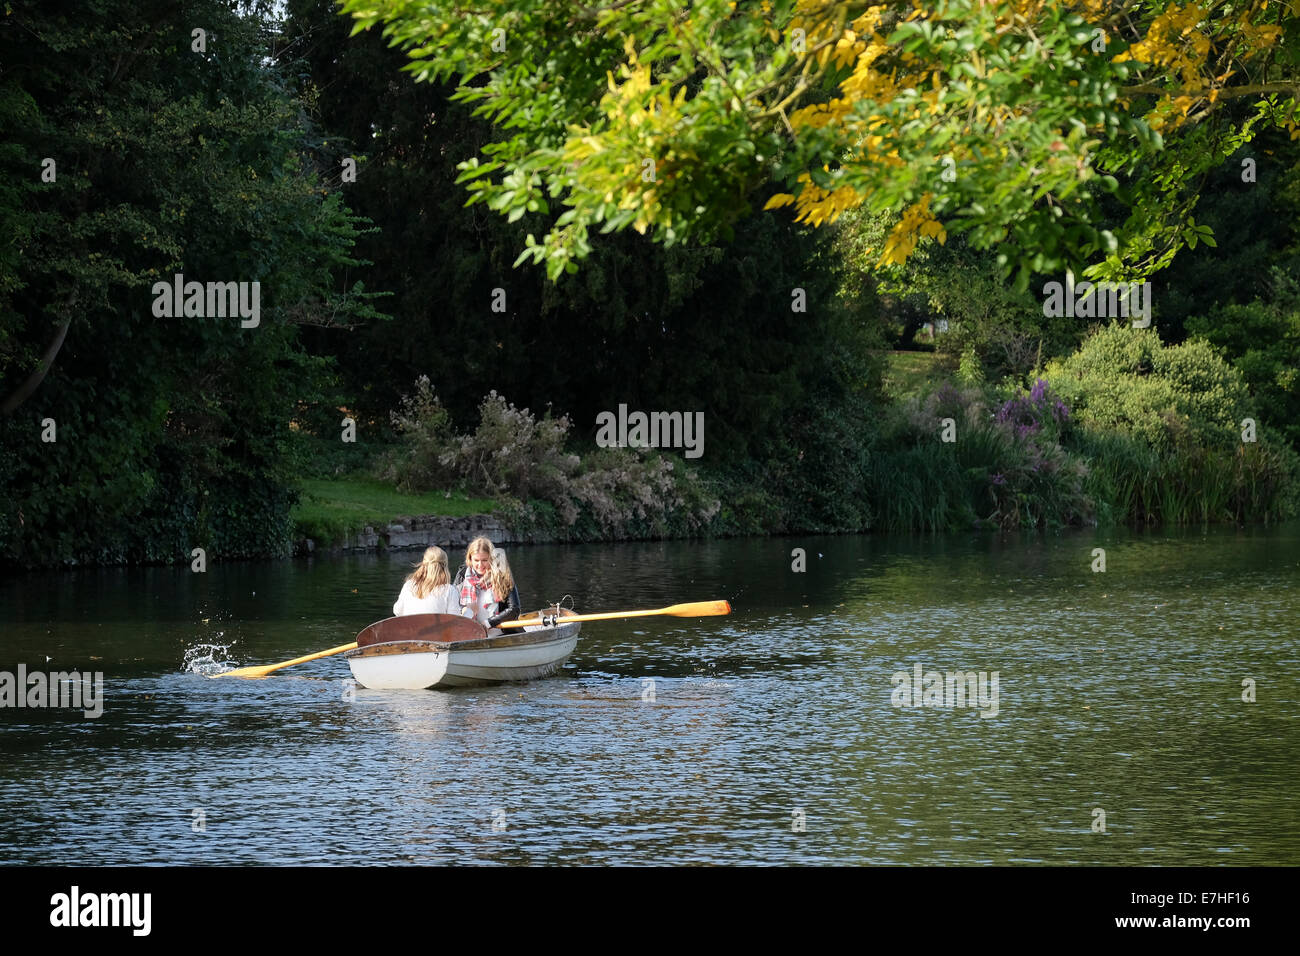 Young women rowing on the River Avon at Stratford Stock Photo